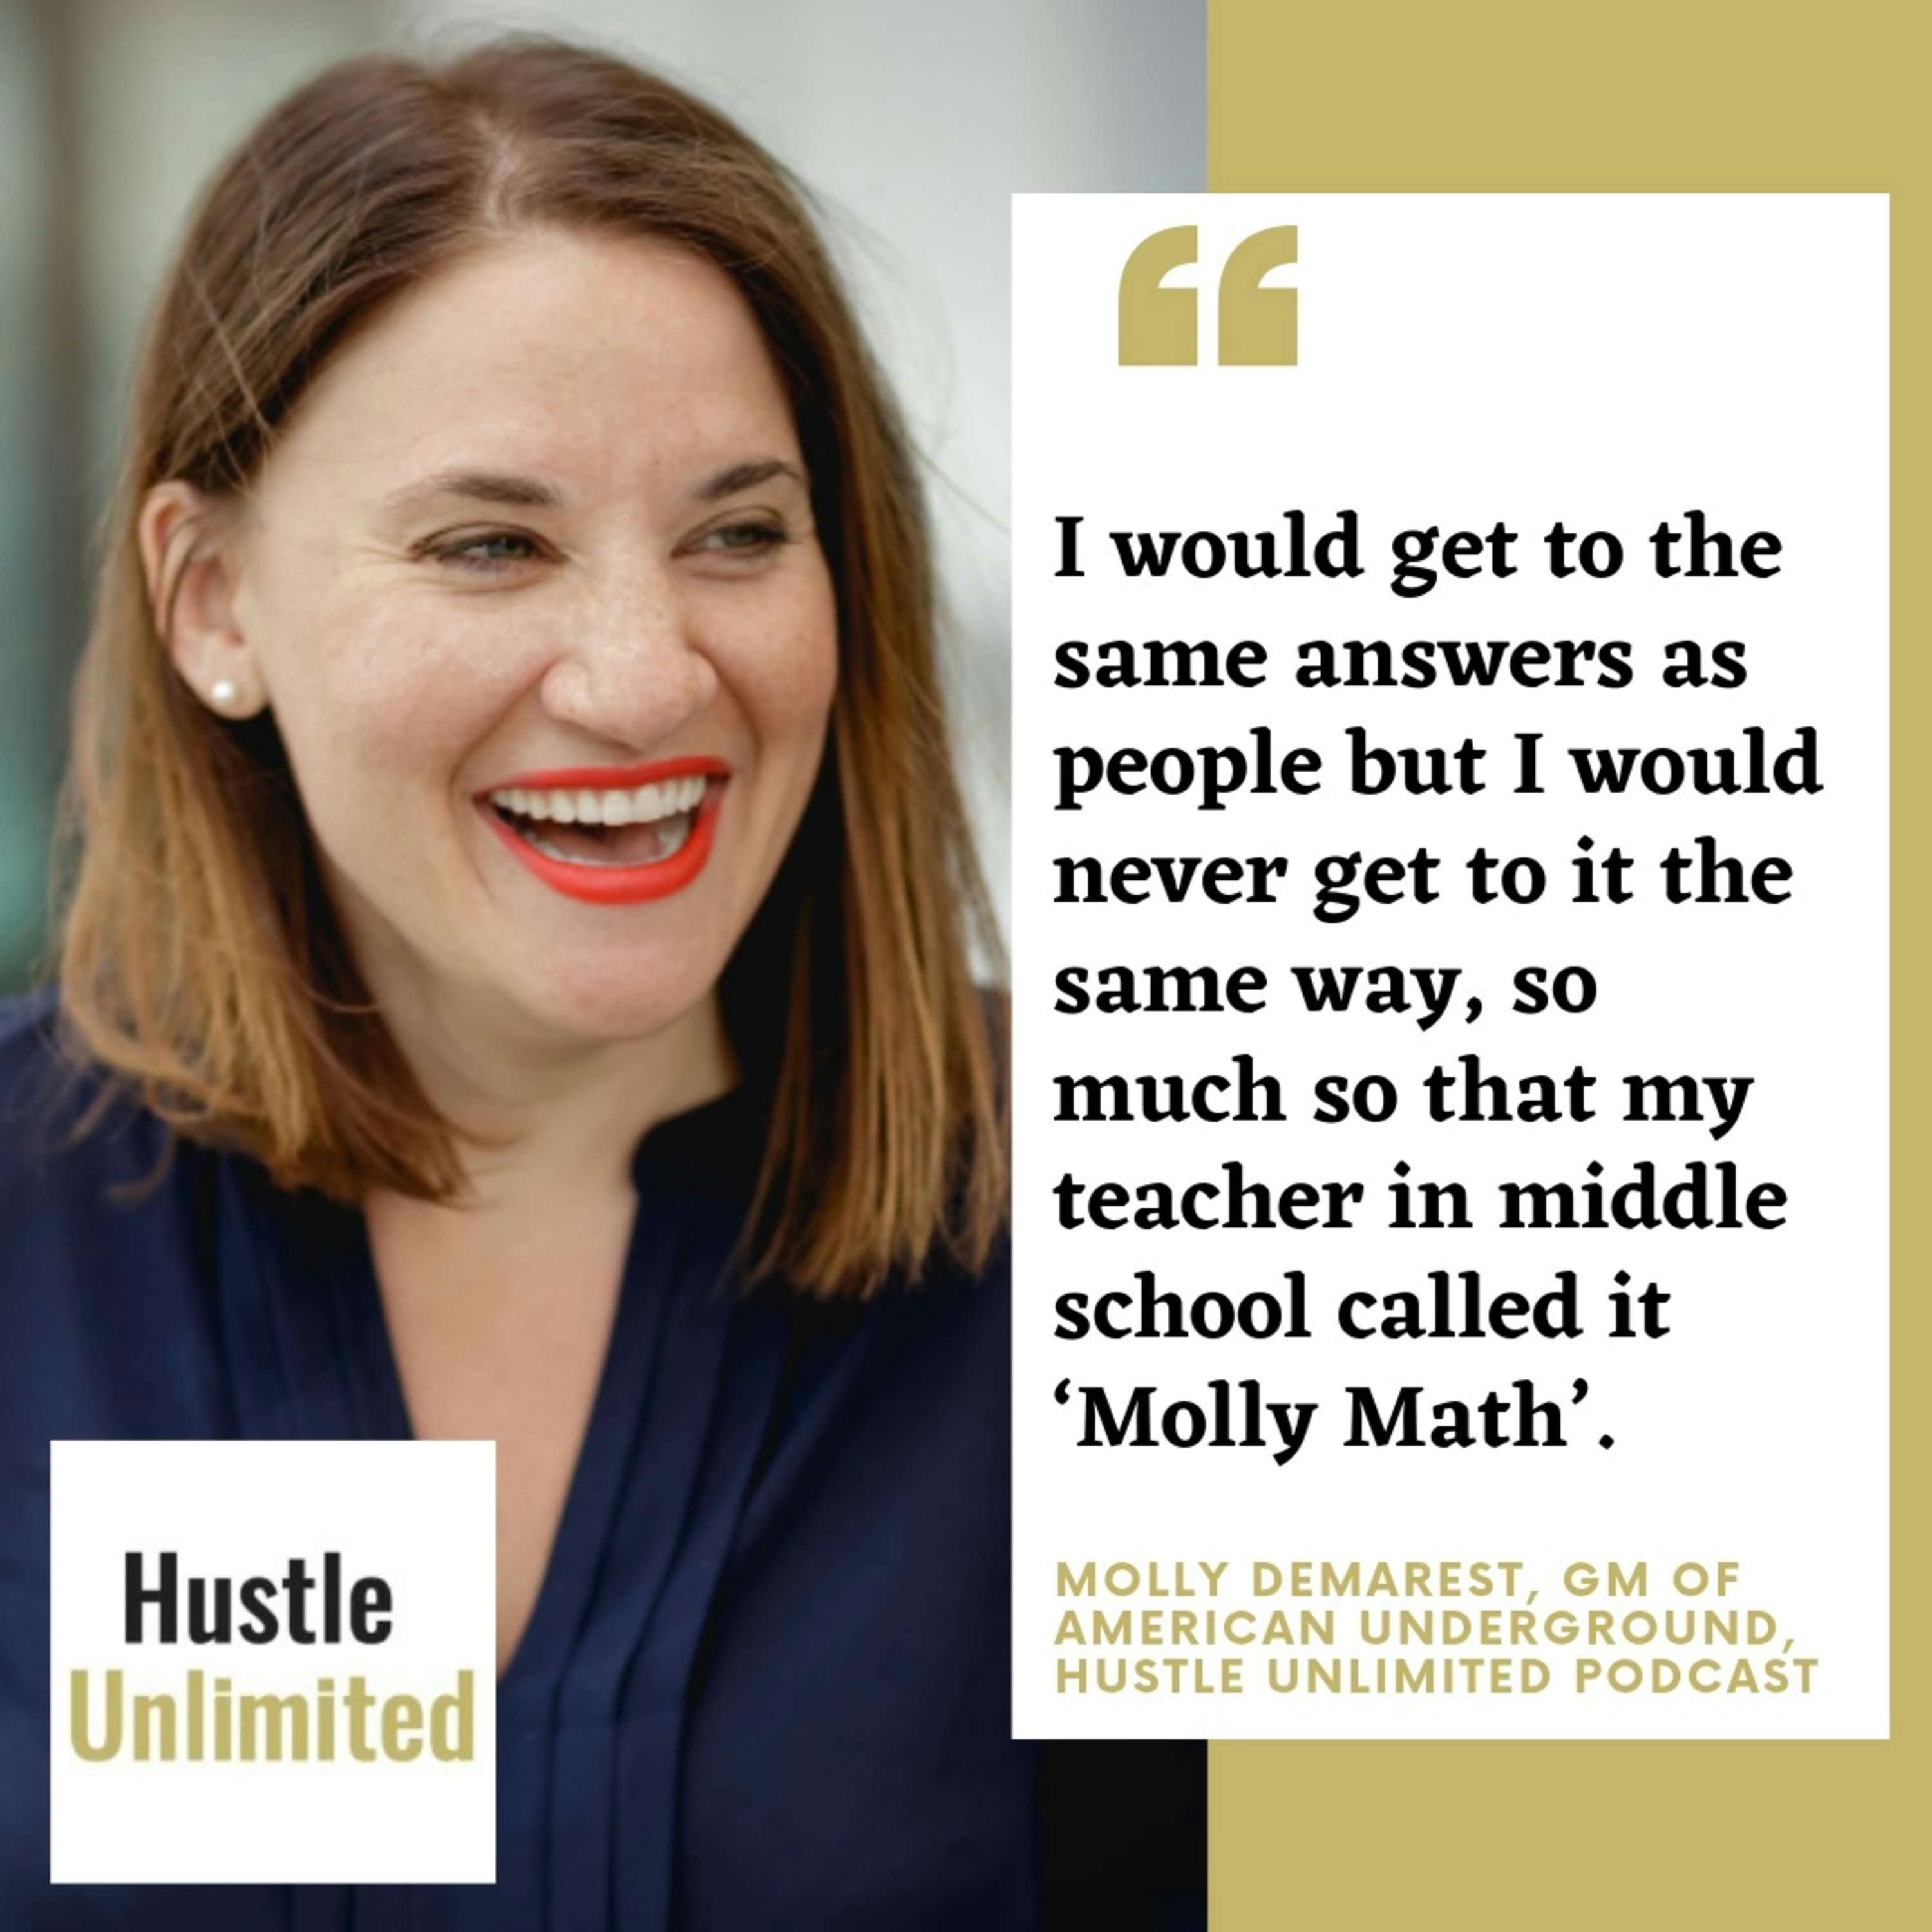 The Diversity You Can’t See & Becoming a Leader, with American Underground GM Molly Demarest